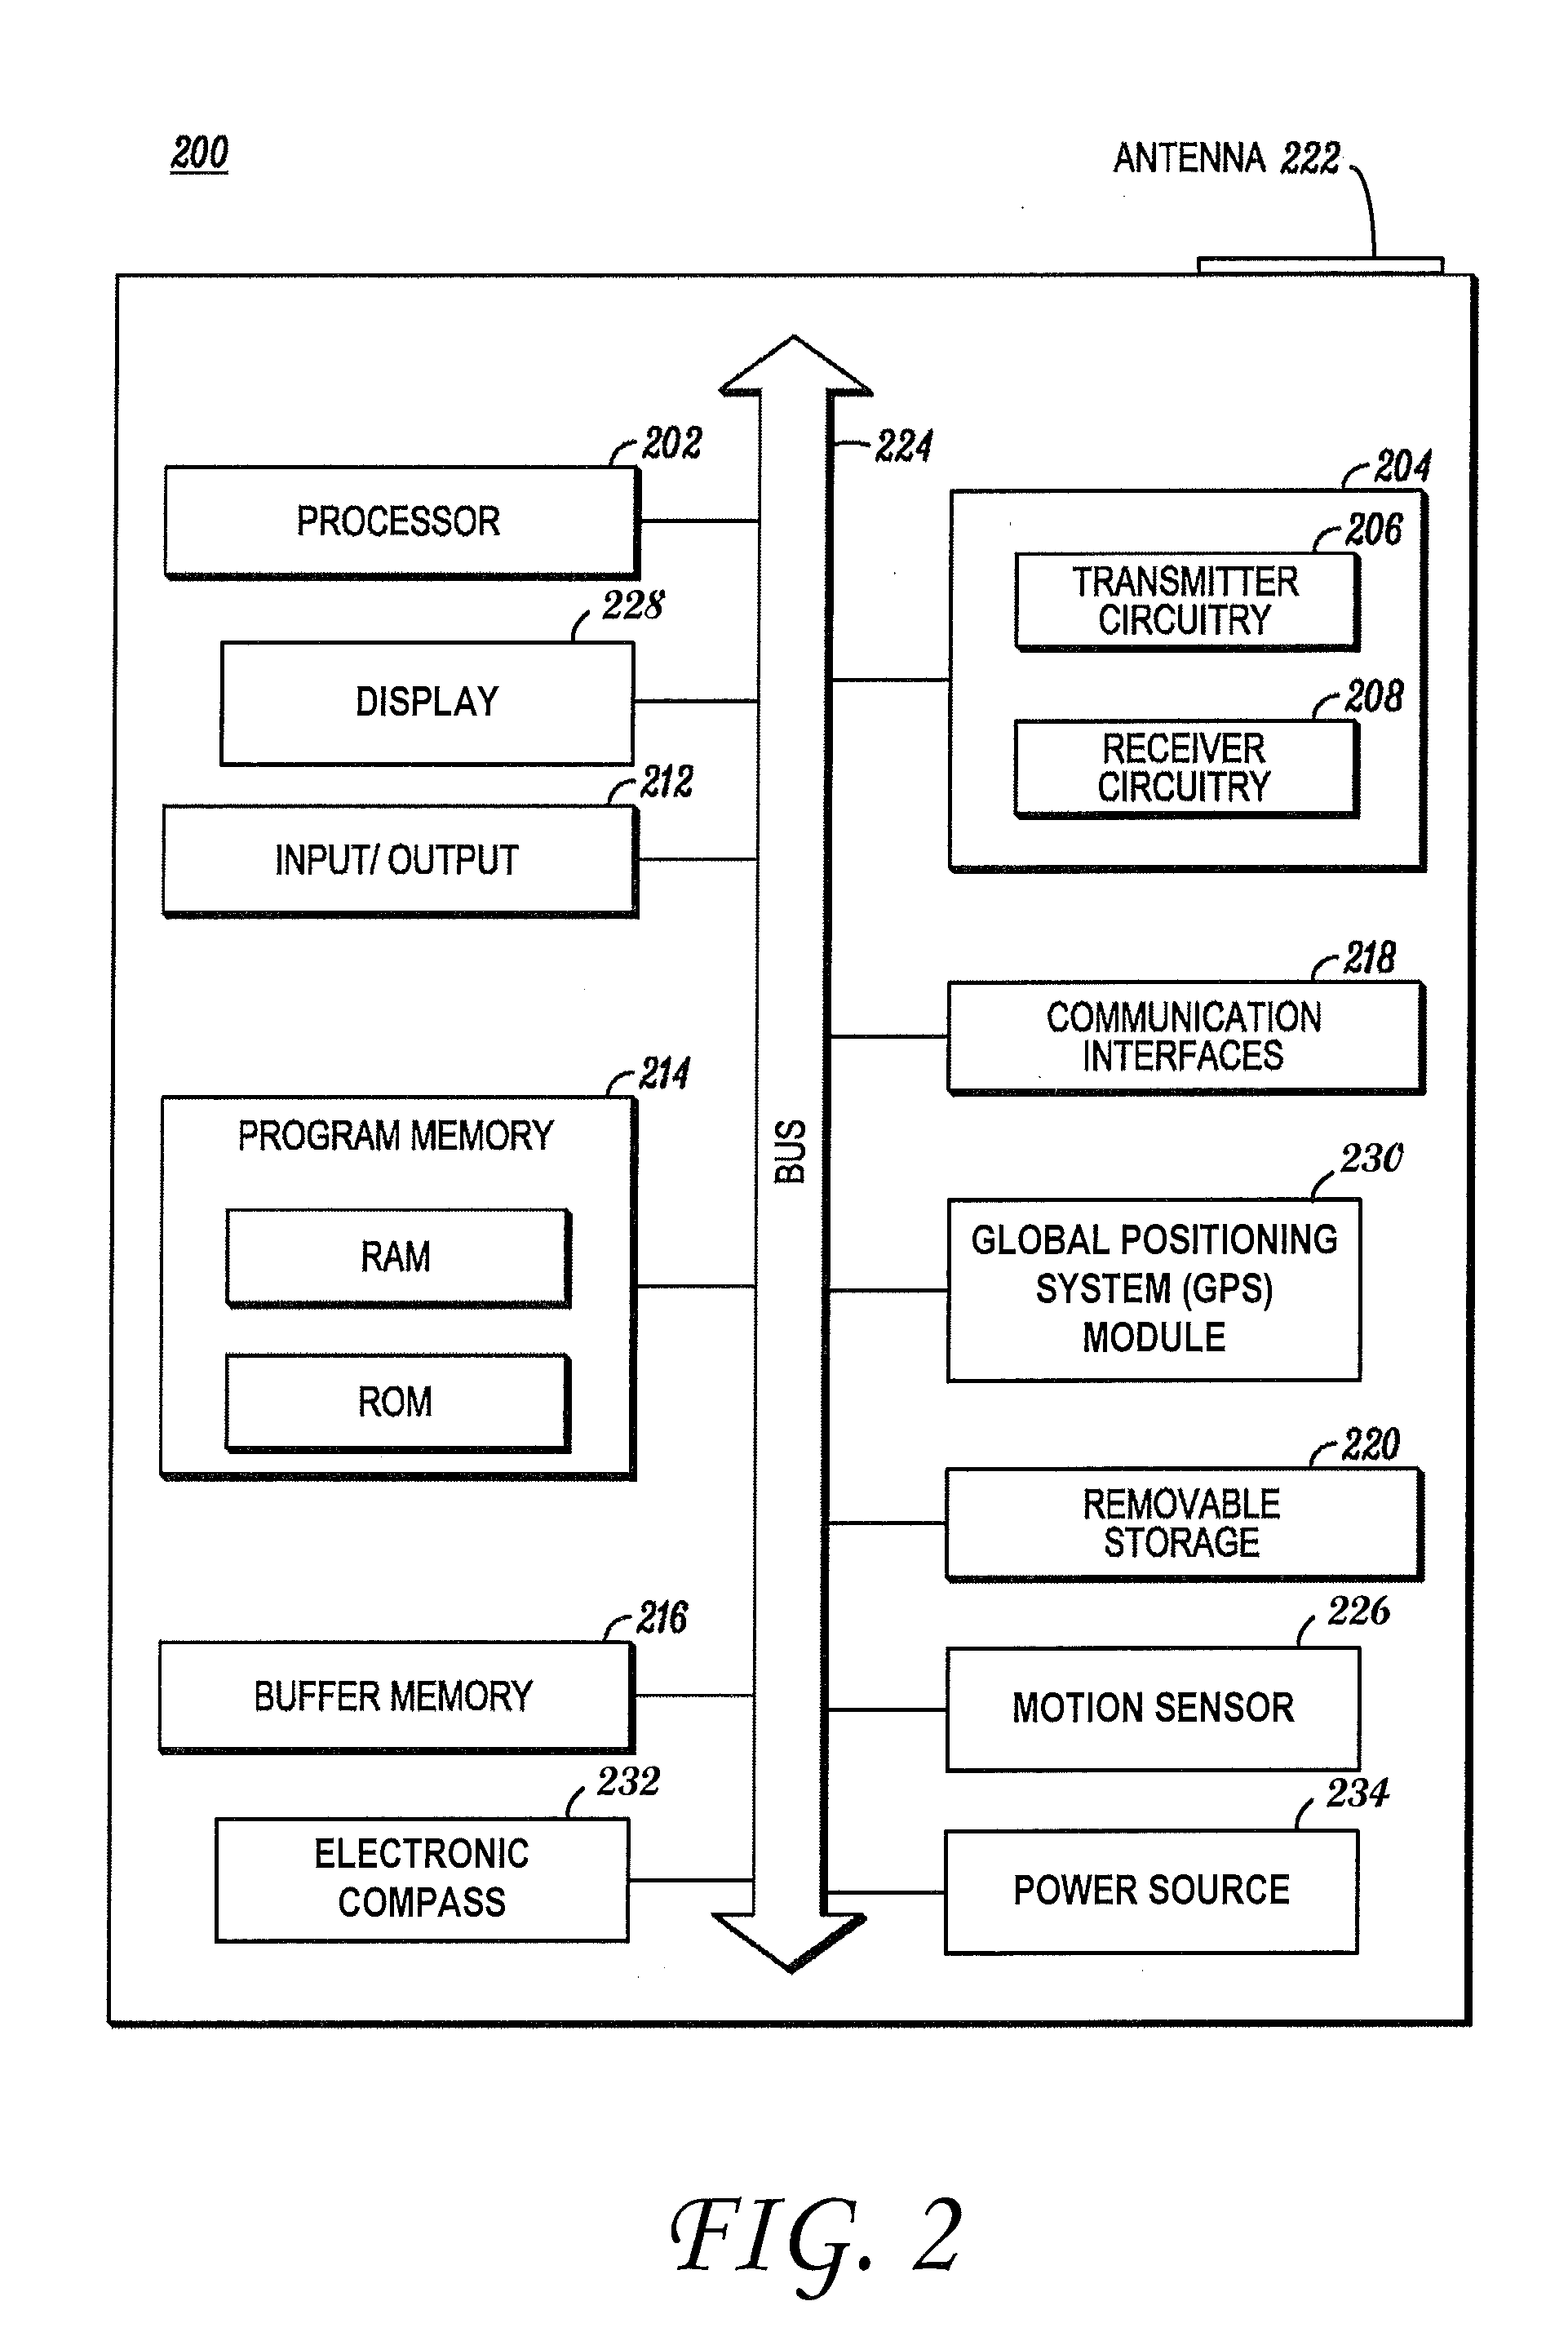 Methods and apparatus for adjusting heading direction in a navigation system